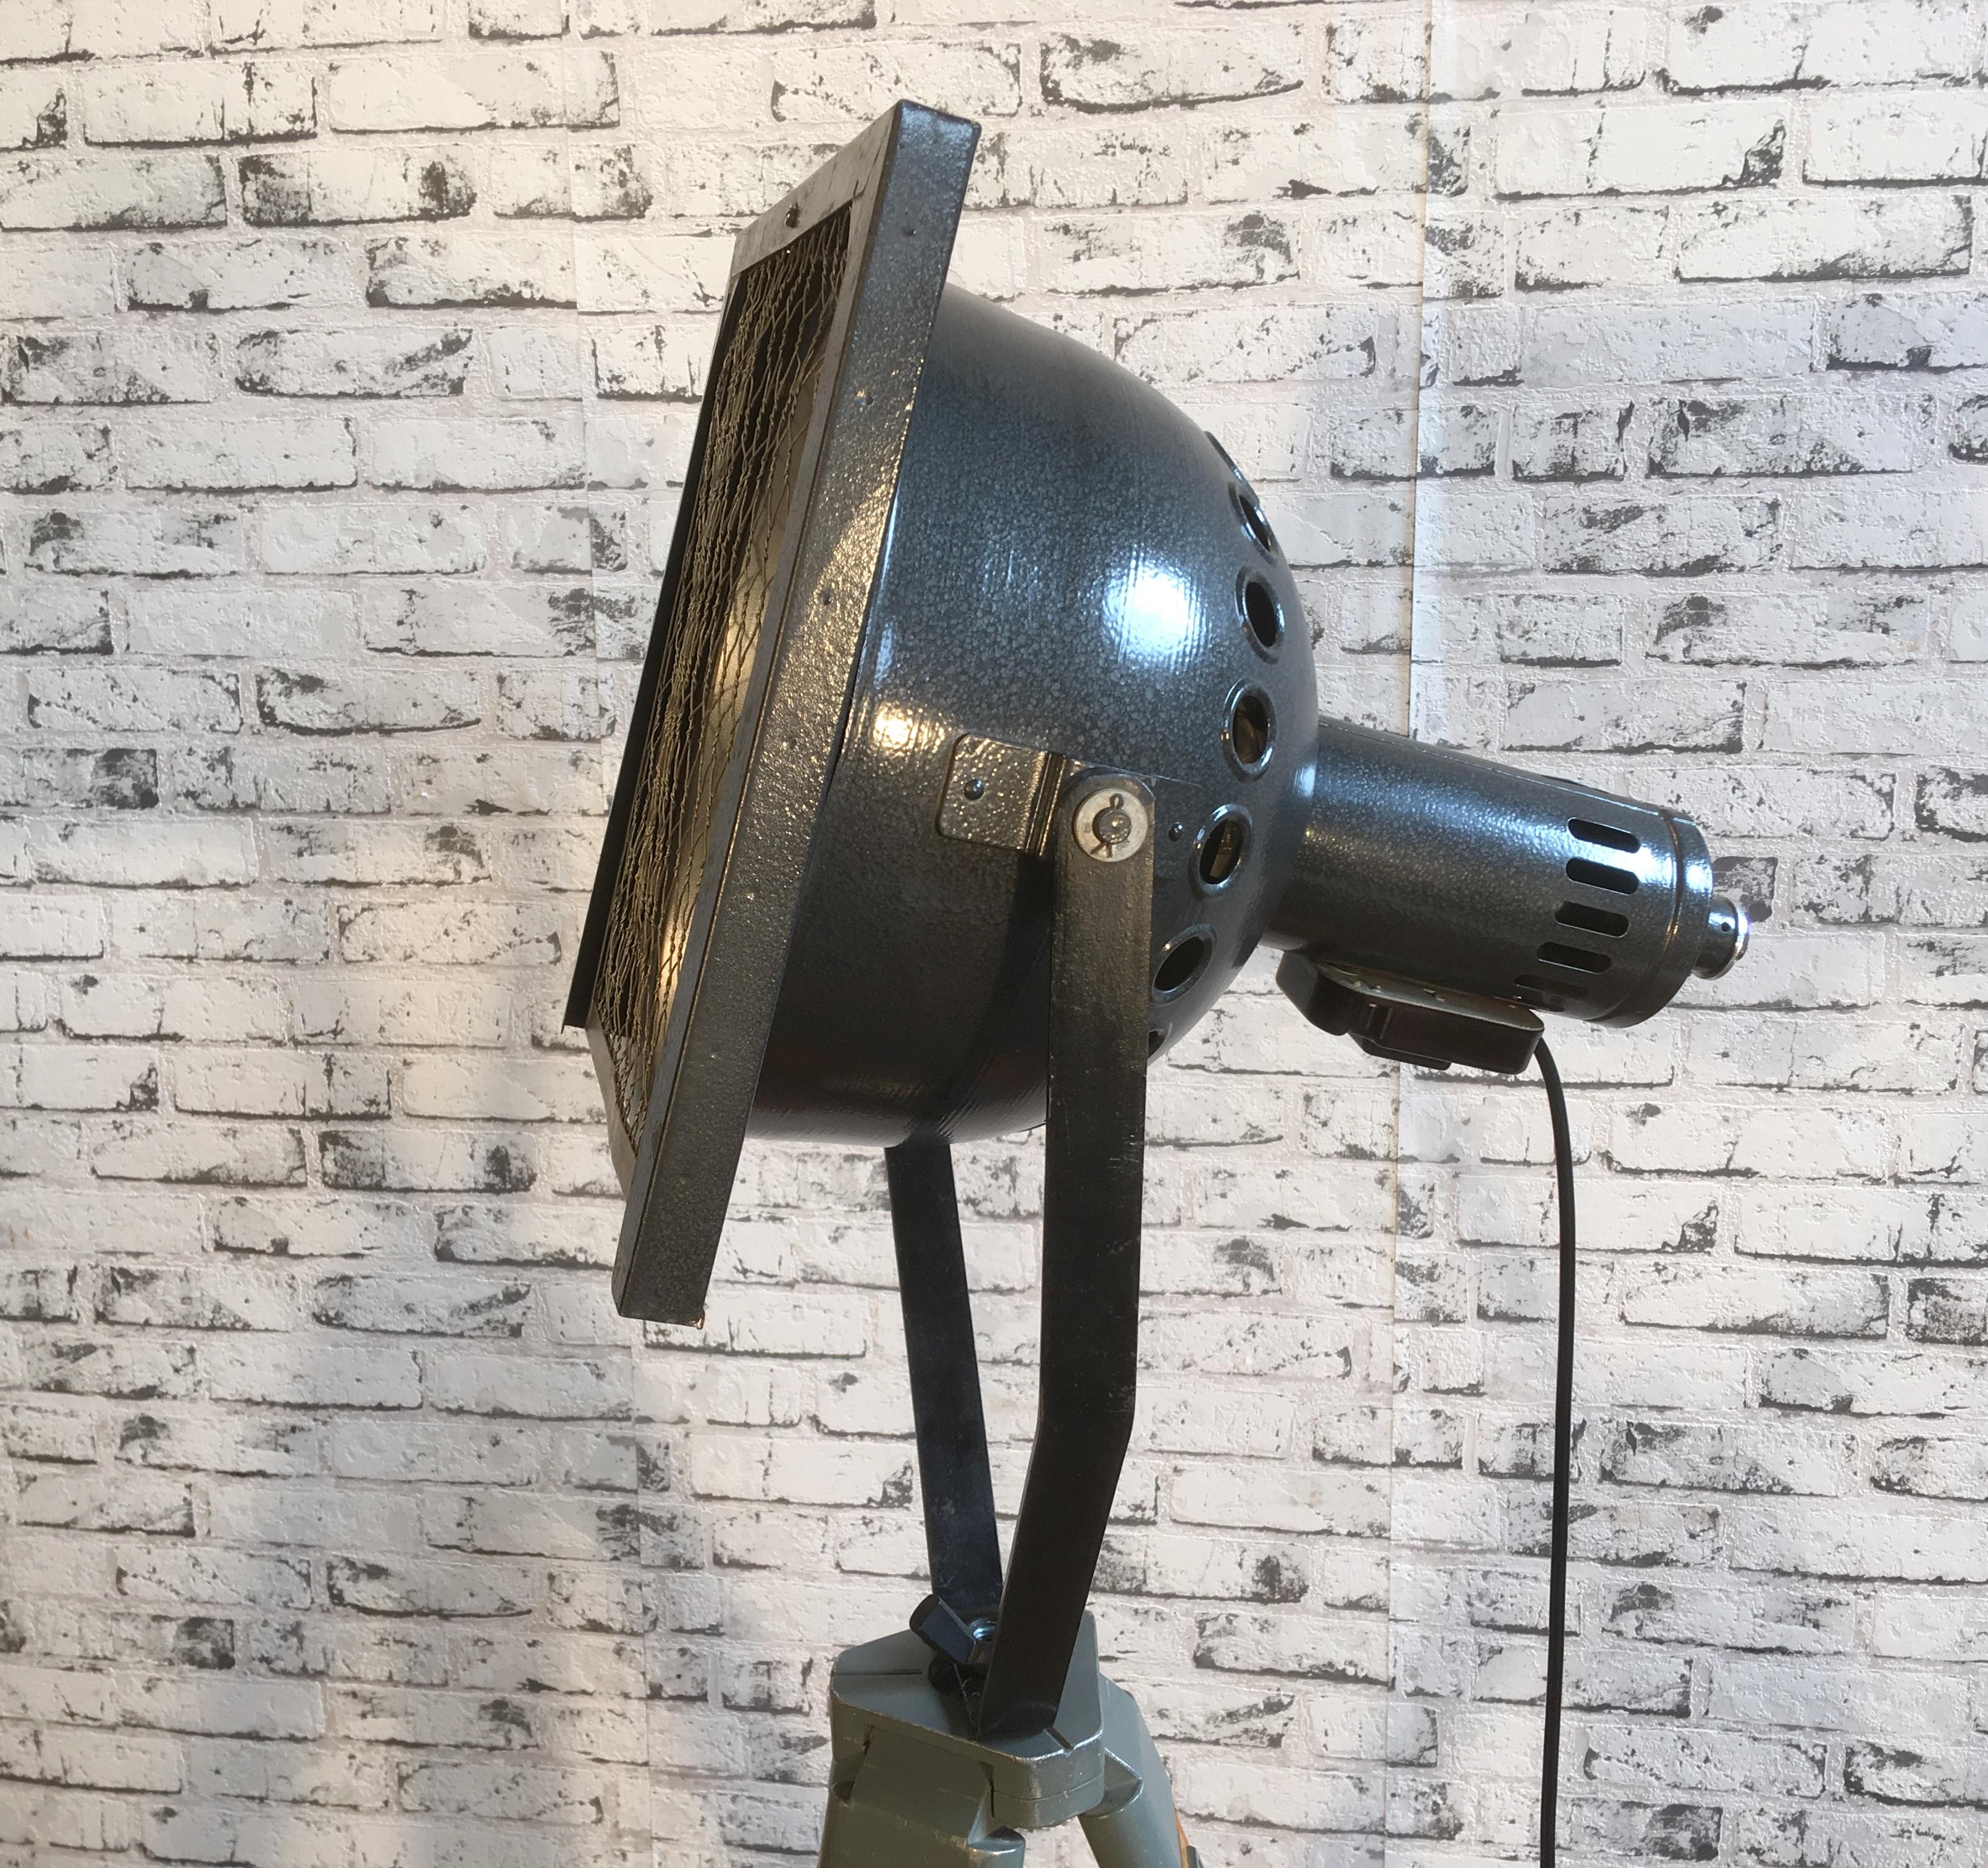 - Vintage theatre spotlight on wooden tripod
- Adjustable height and angle
- Black metal body
- Grey grid
- Dimensions of the lamp: 33 x 33 cm, height 55cm, depth 40cm
- Minimum total height: 150 cm
- Maximum total height: 205 cm
- New